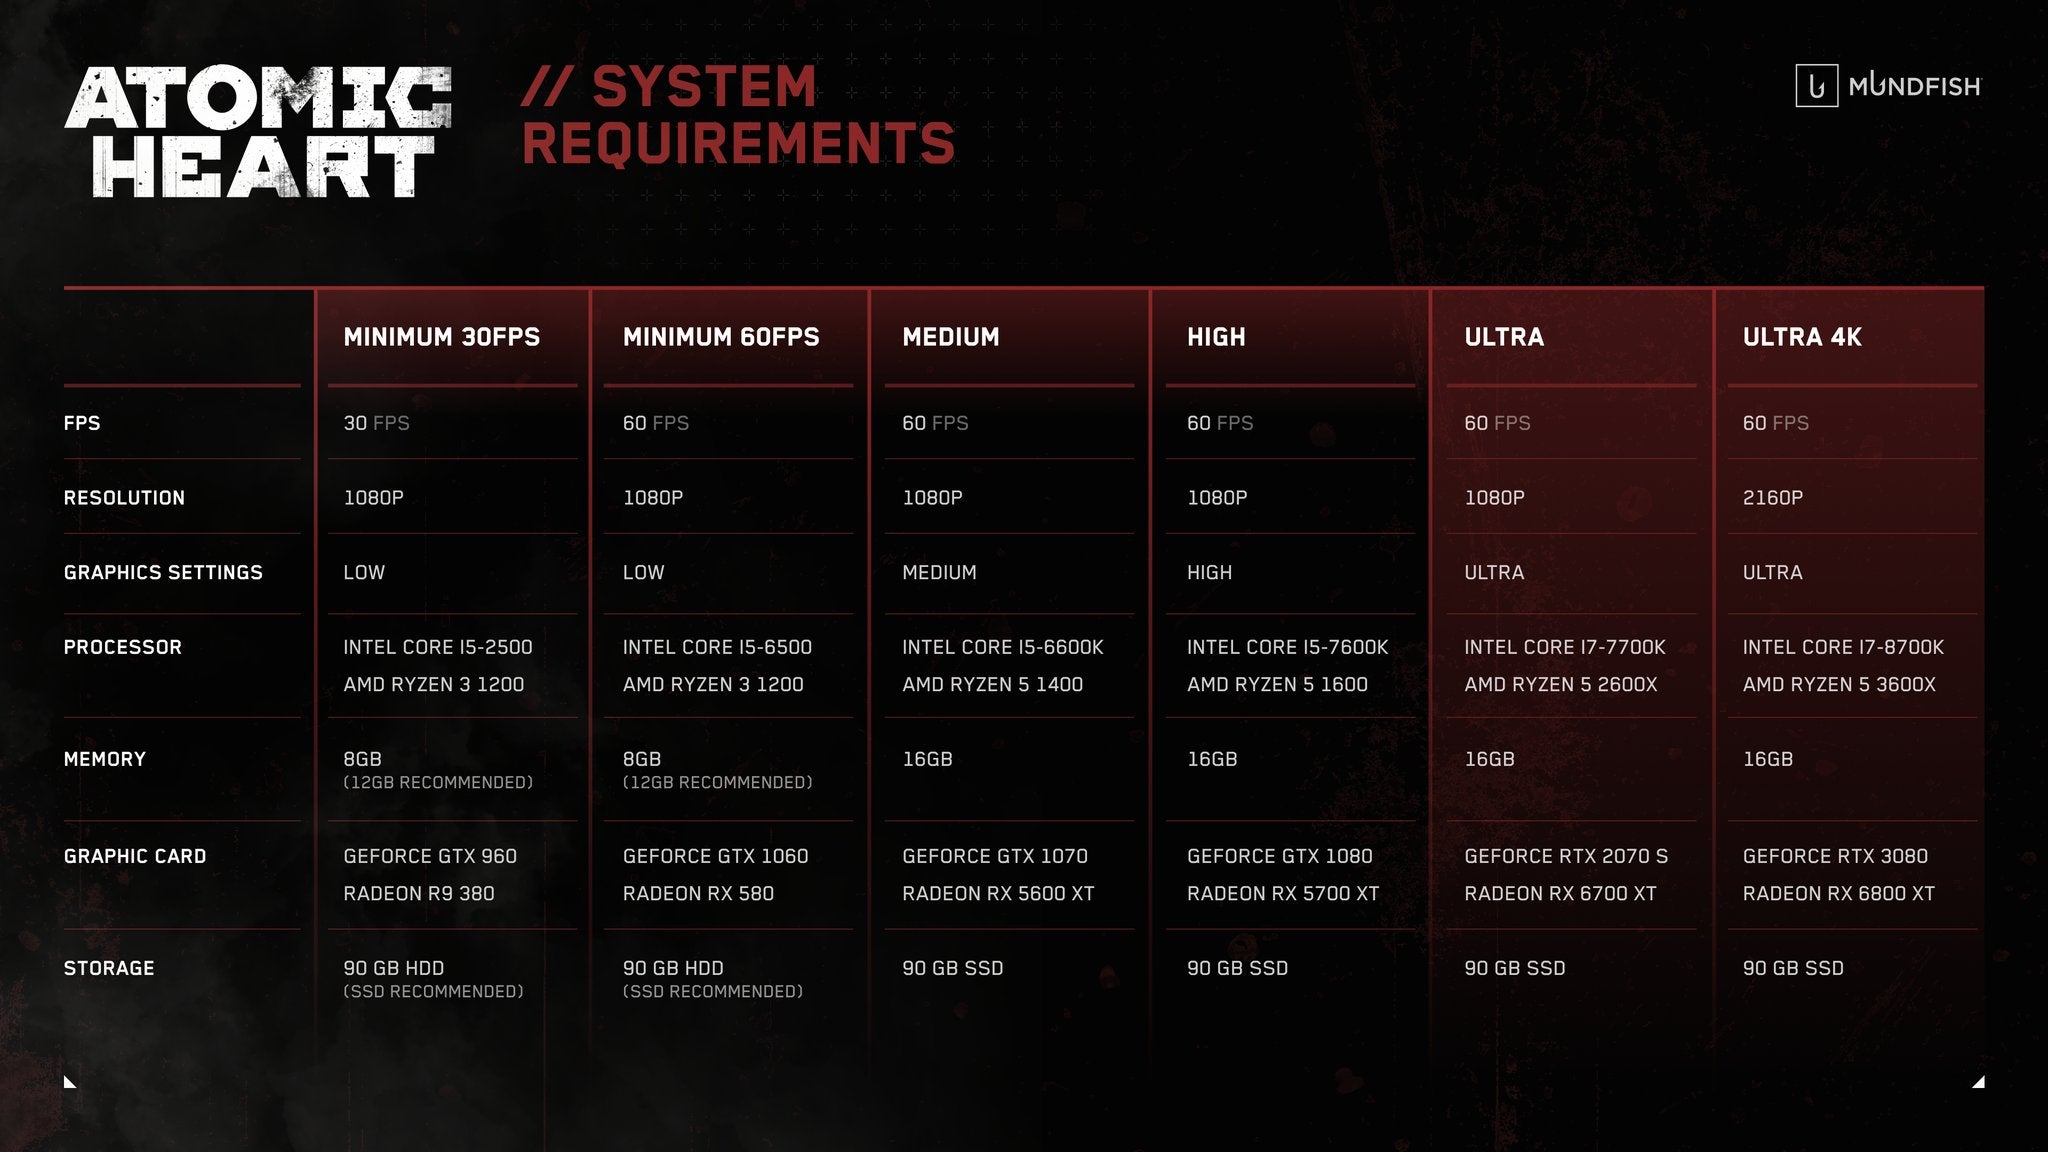 System requirements for Atomic Heart.